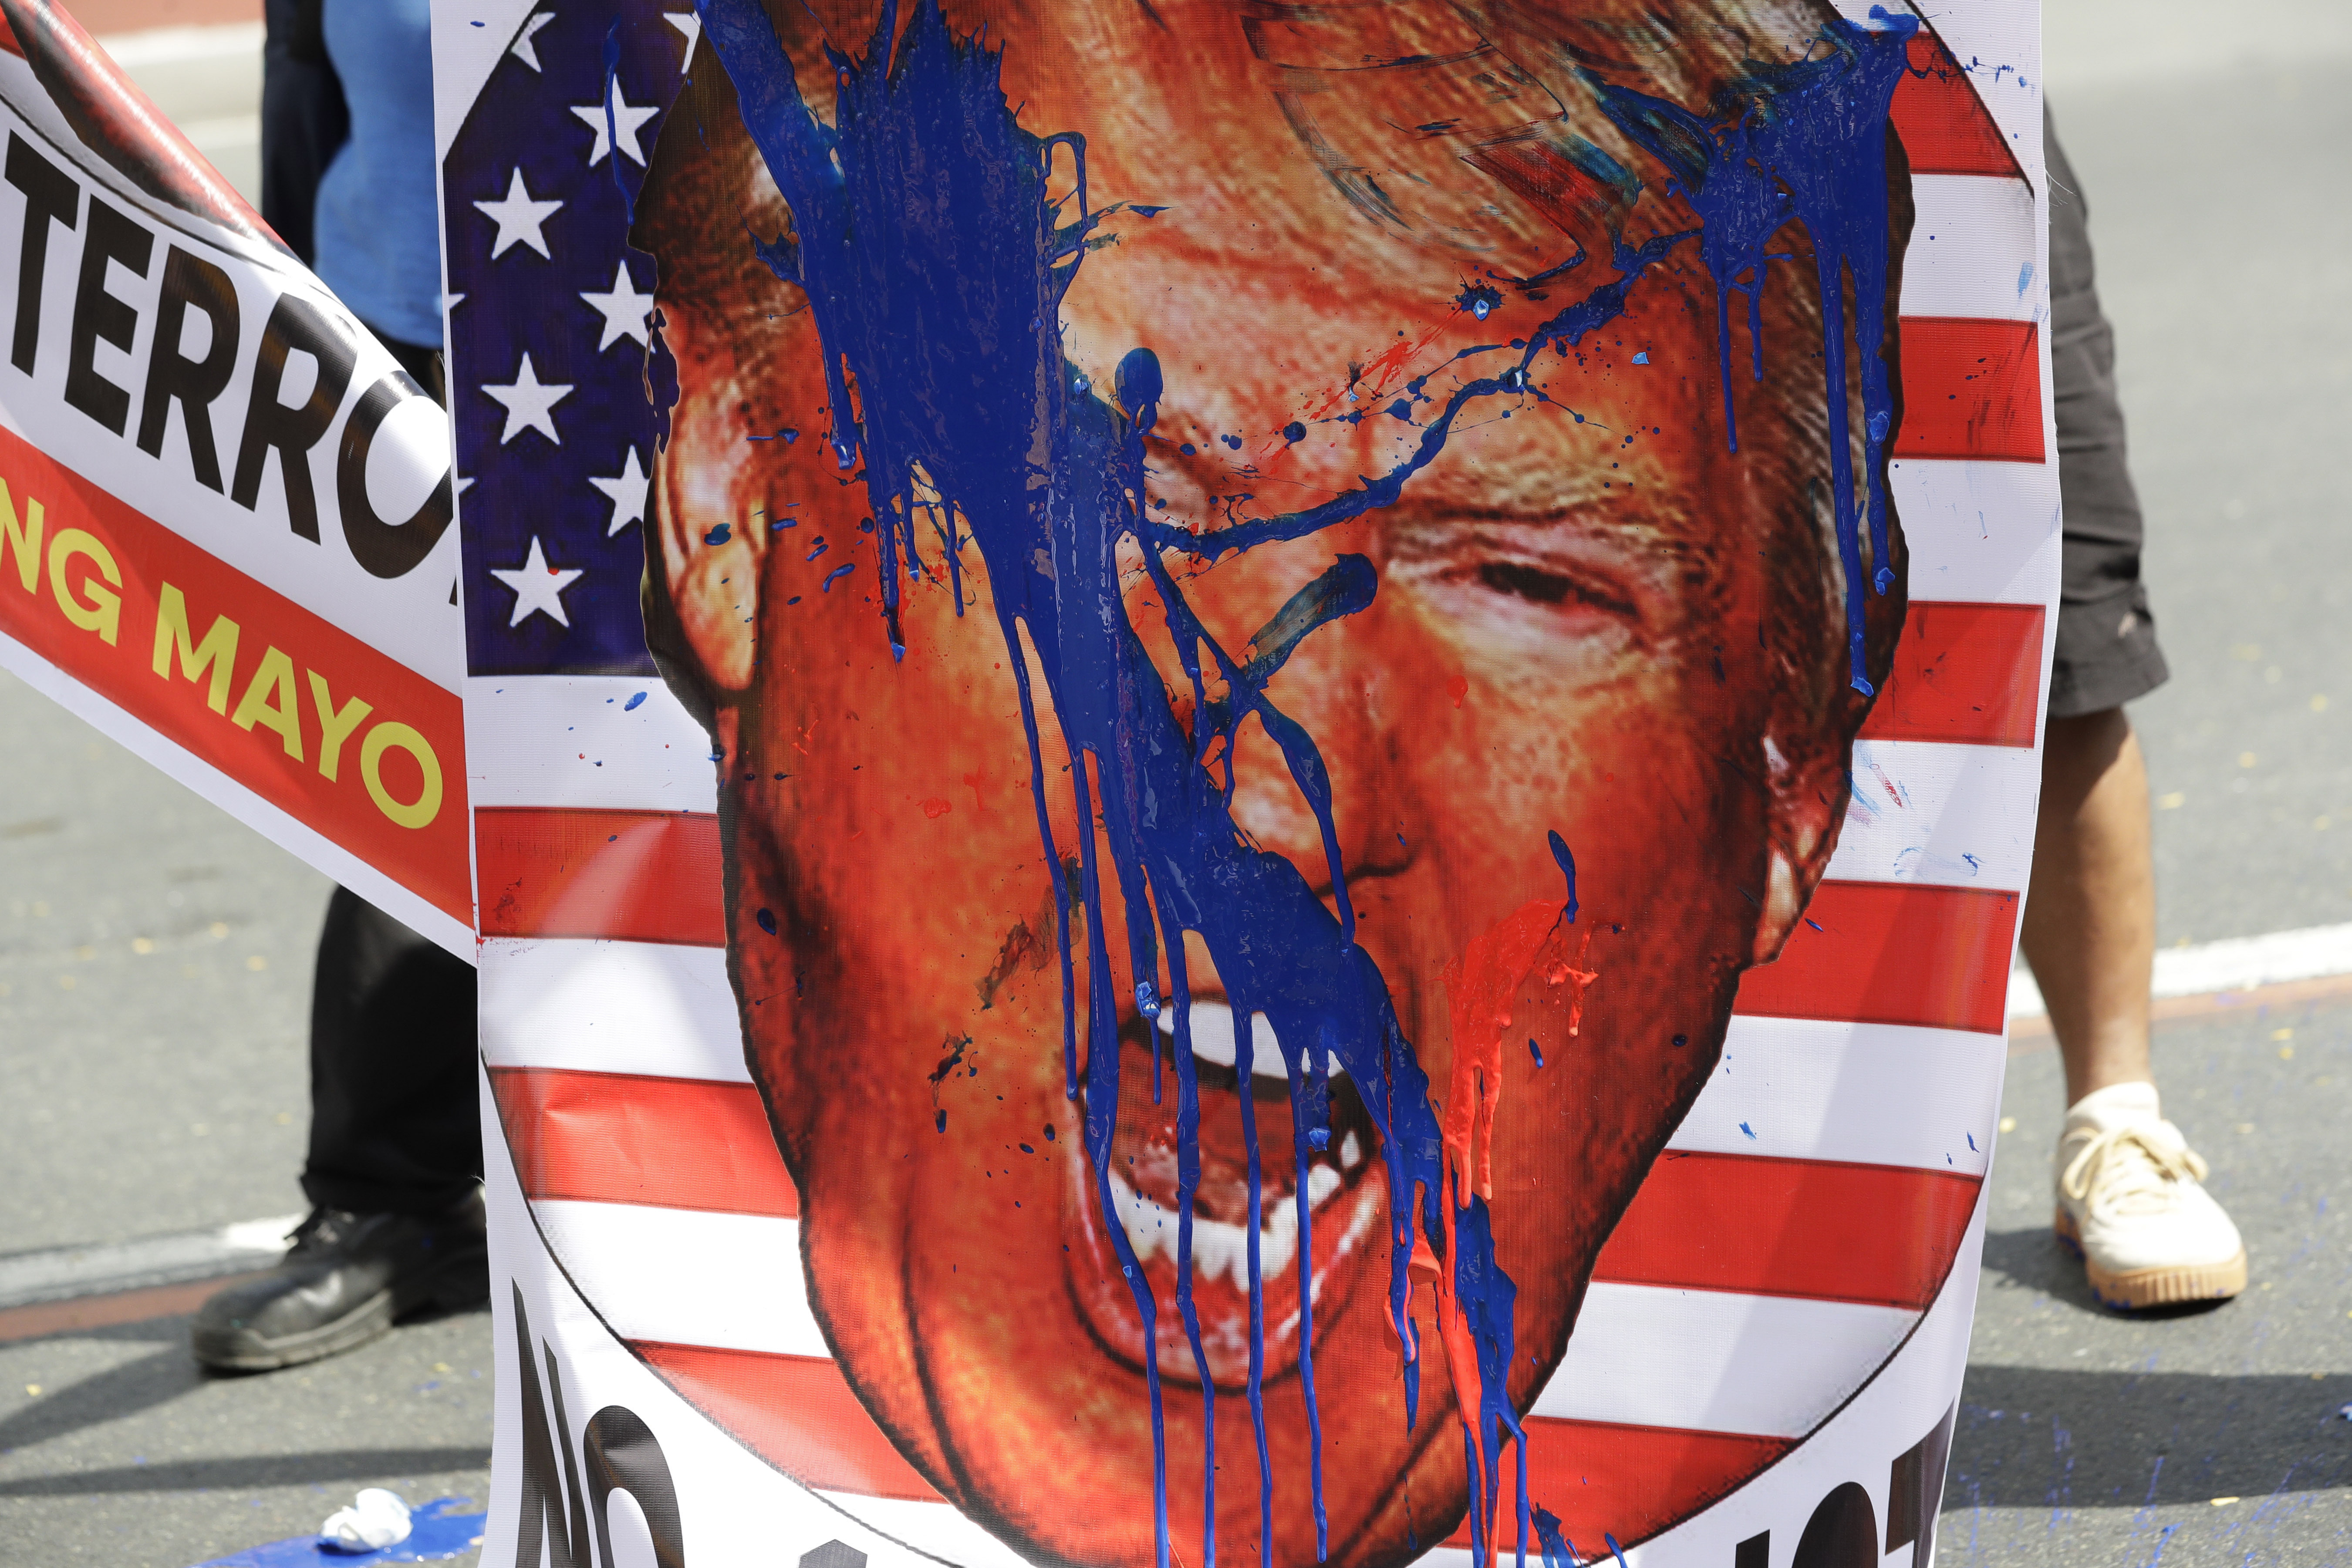 An image of U.S. President Donald Trump is splashed with paint by protesters as they hold a rally opposing the recent attack of the U.S. against Iran, where it killed Gen. Qassem Soleimani, near the U.S. Embassy in Manila, Philippines, Monday, Jan. 6, 2020. Philippine President Rodrigo Duterte ordered the military to prepare to deploy its aircraft and ships 